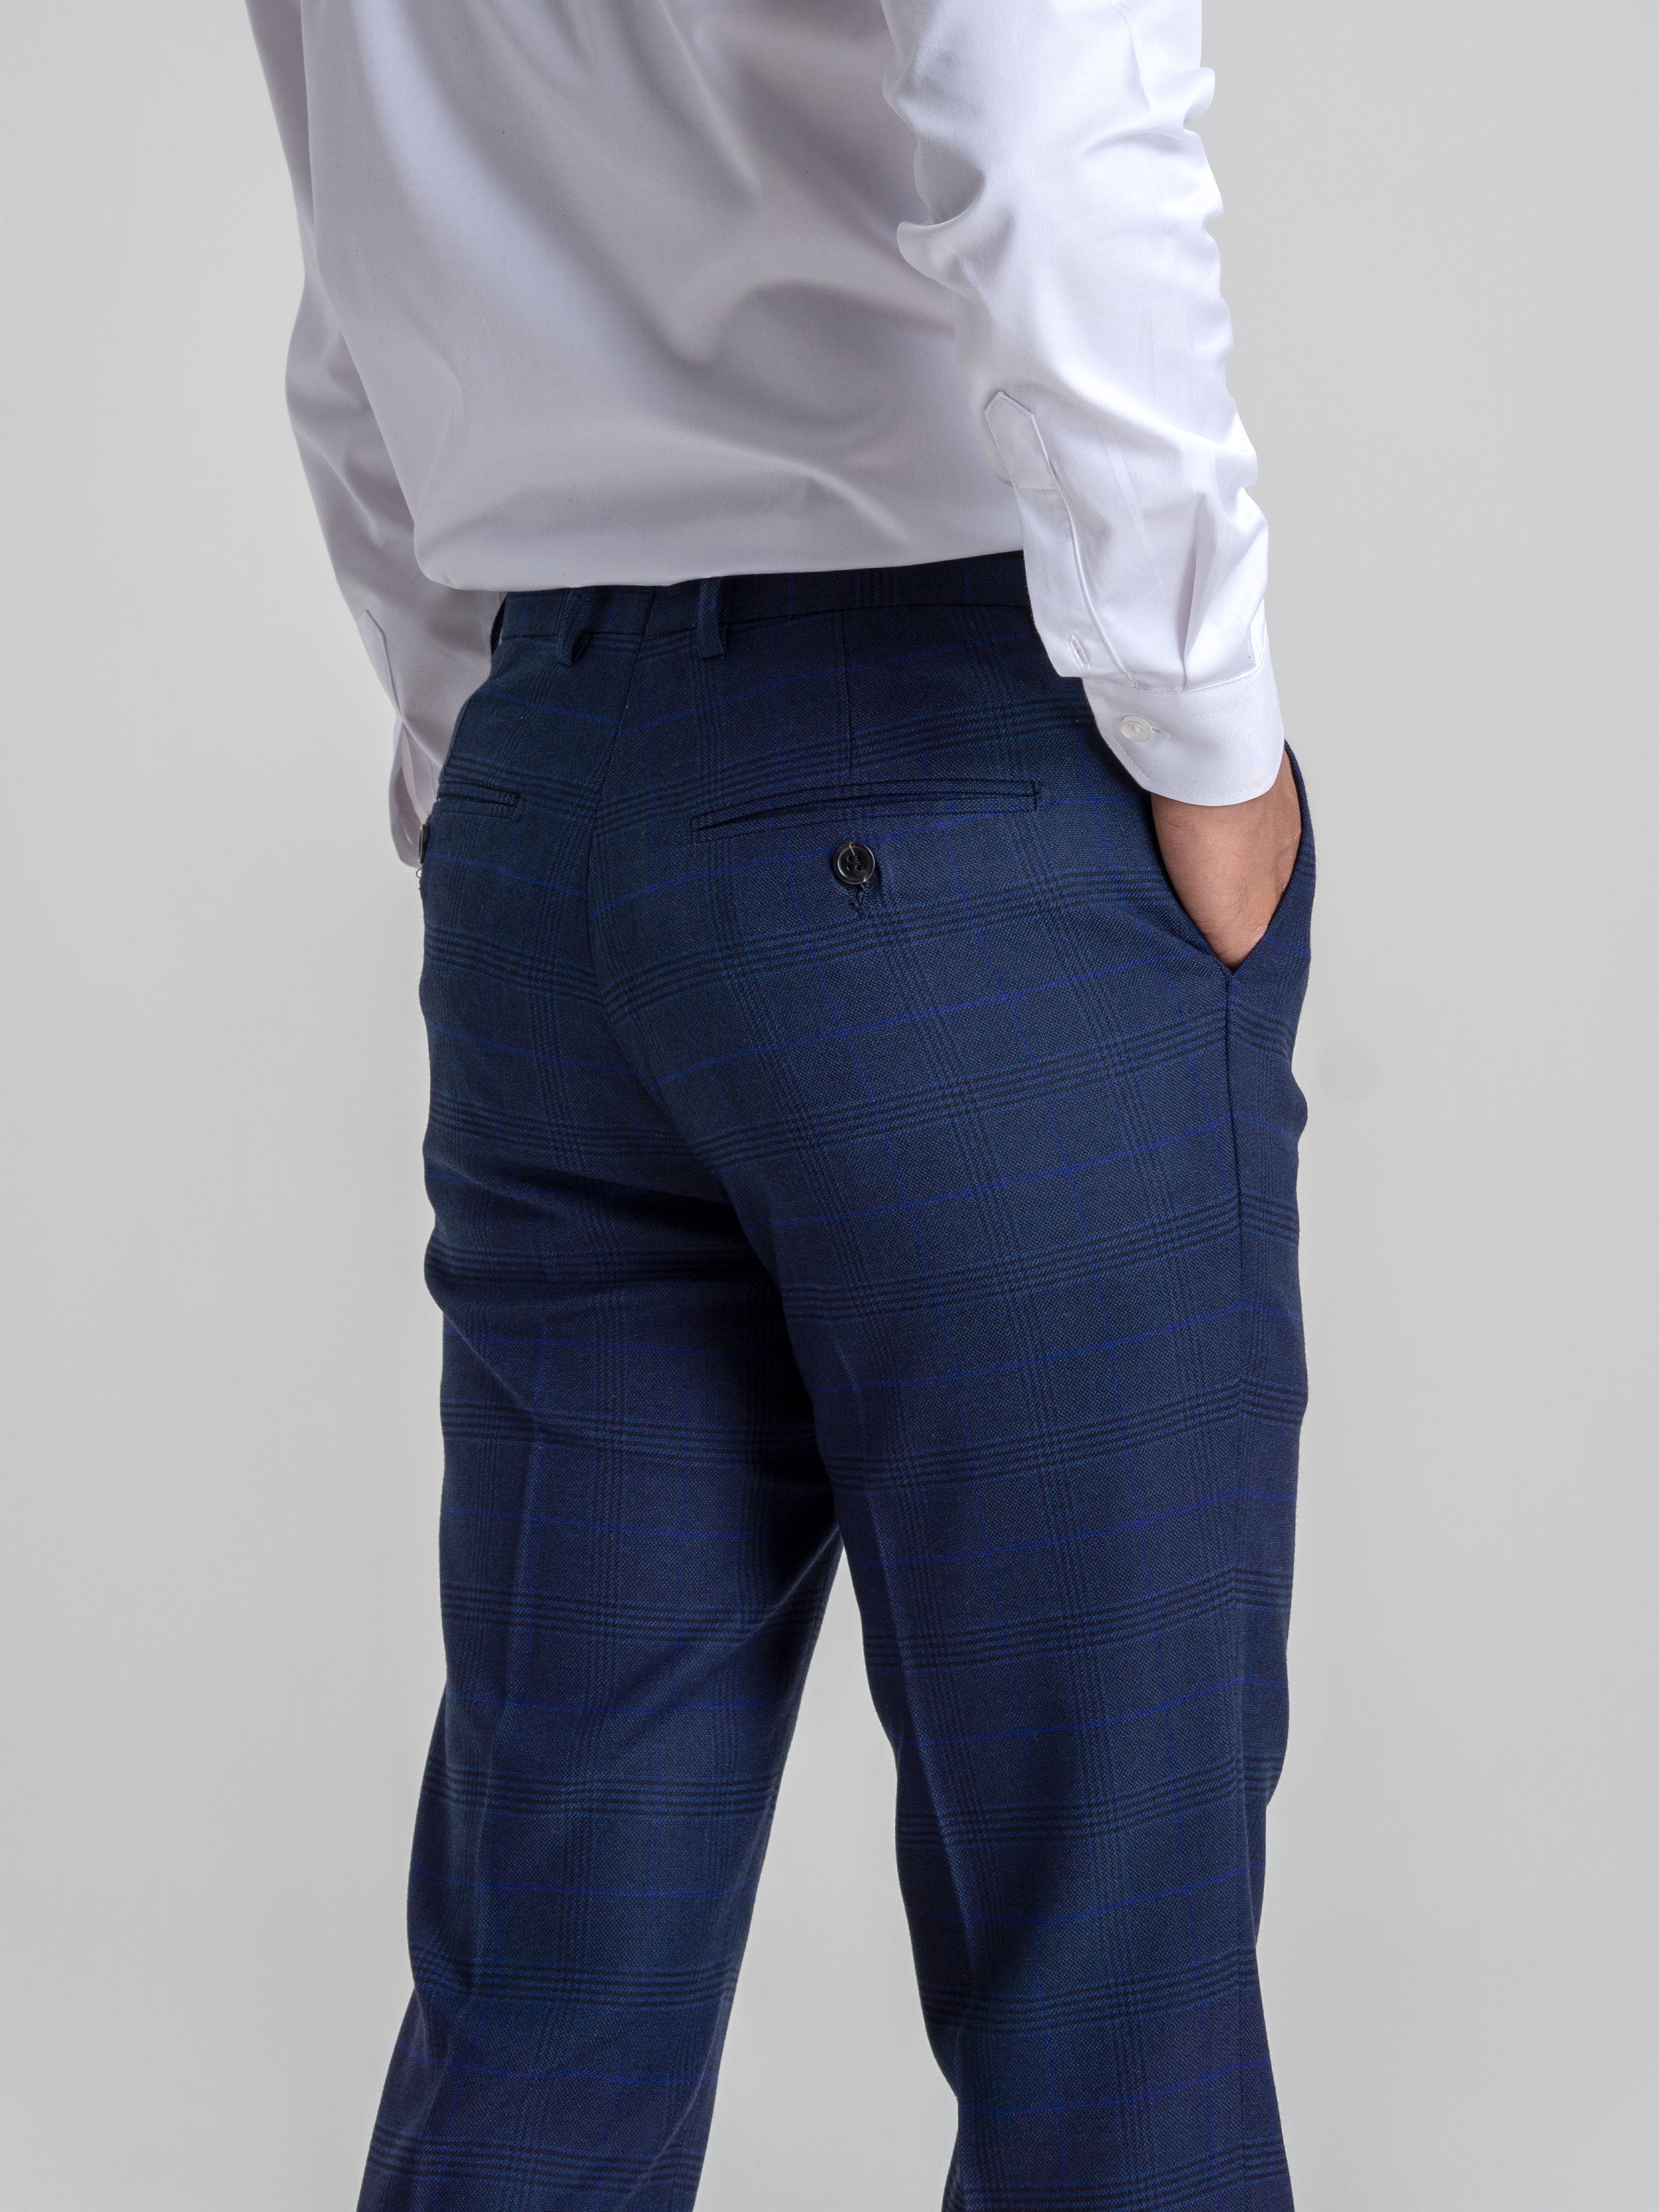 Trousers With Belt Loop -  Royal Blue Classic Checkered (Stretchable) - Zeve Shoes